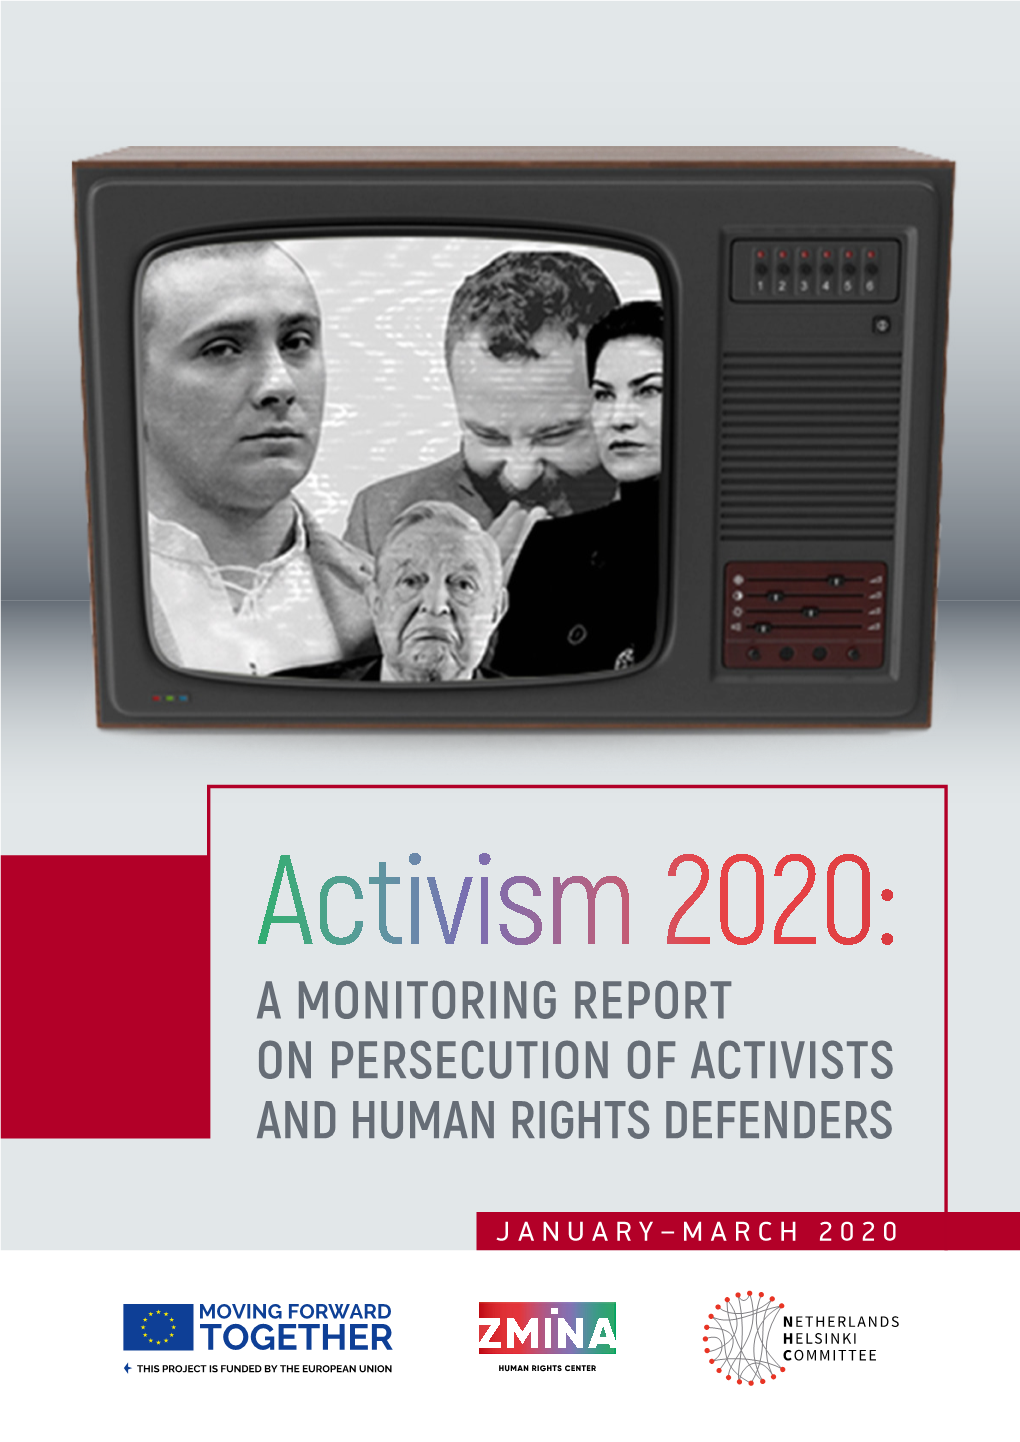 Activism 2020: a Monitoring Report on Persecution of Activists and Human Rights Defenders